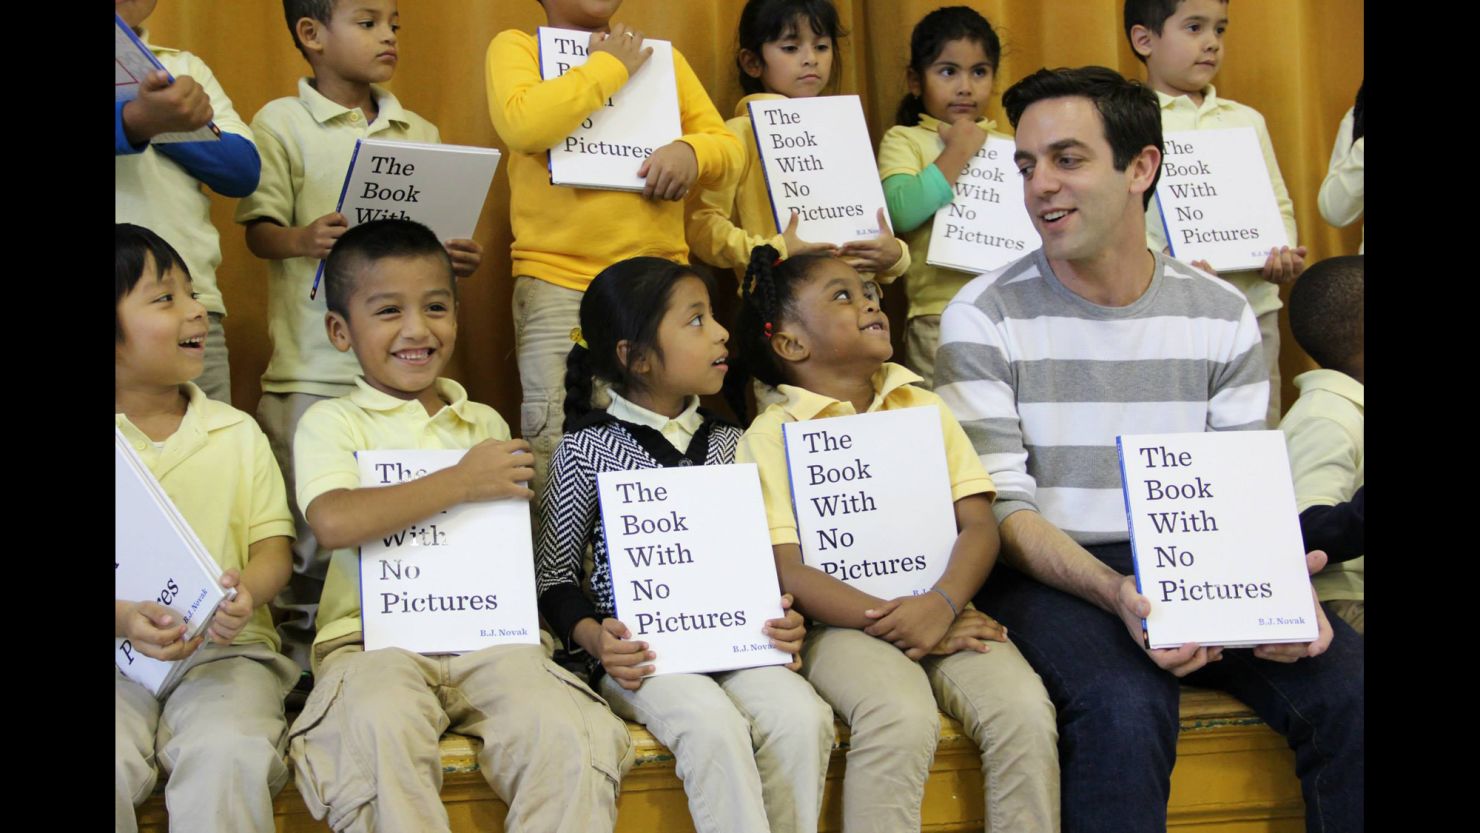 Actor B.J. Novak (right), who is best known for his role as Ryan Howard in "The Office," has written a hit children's book.